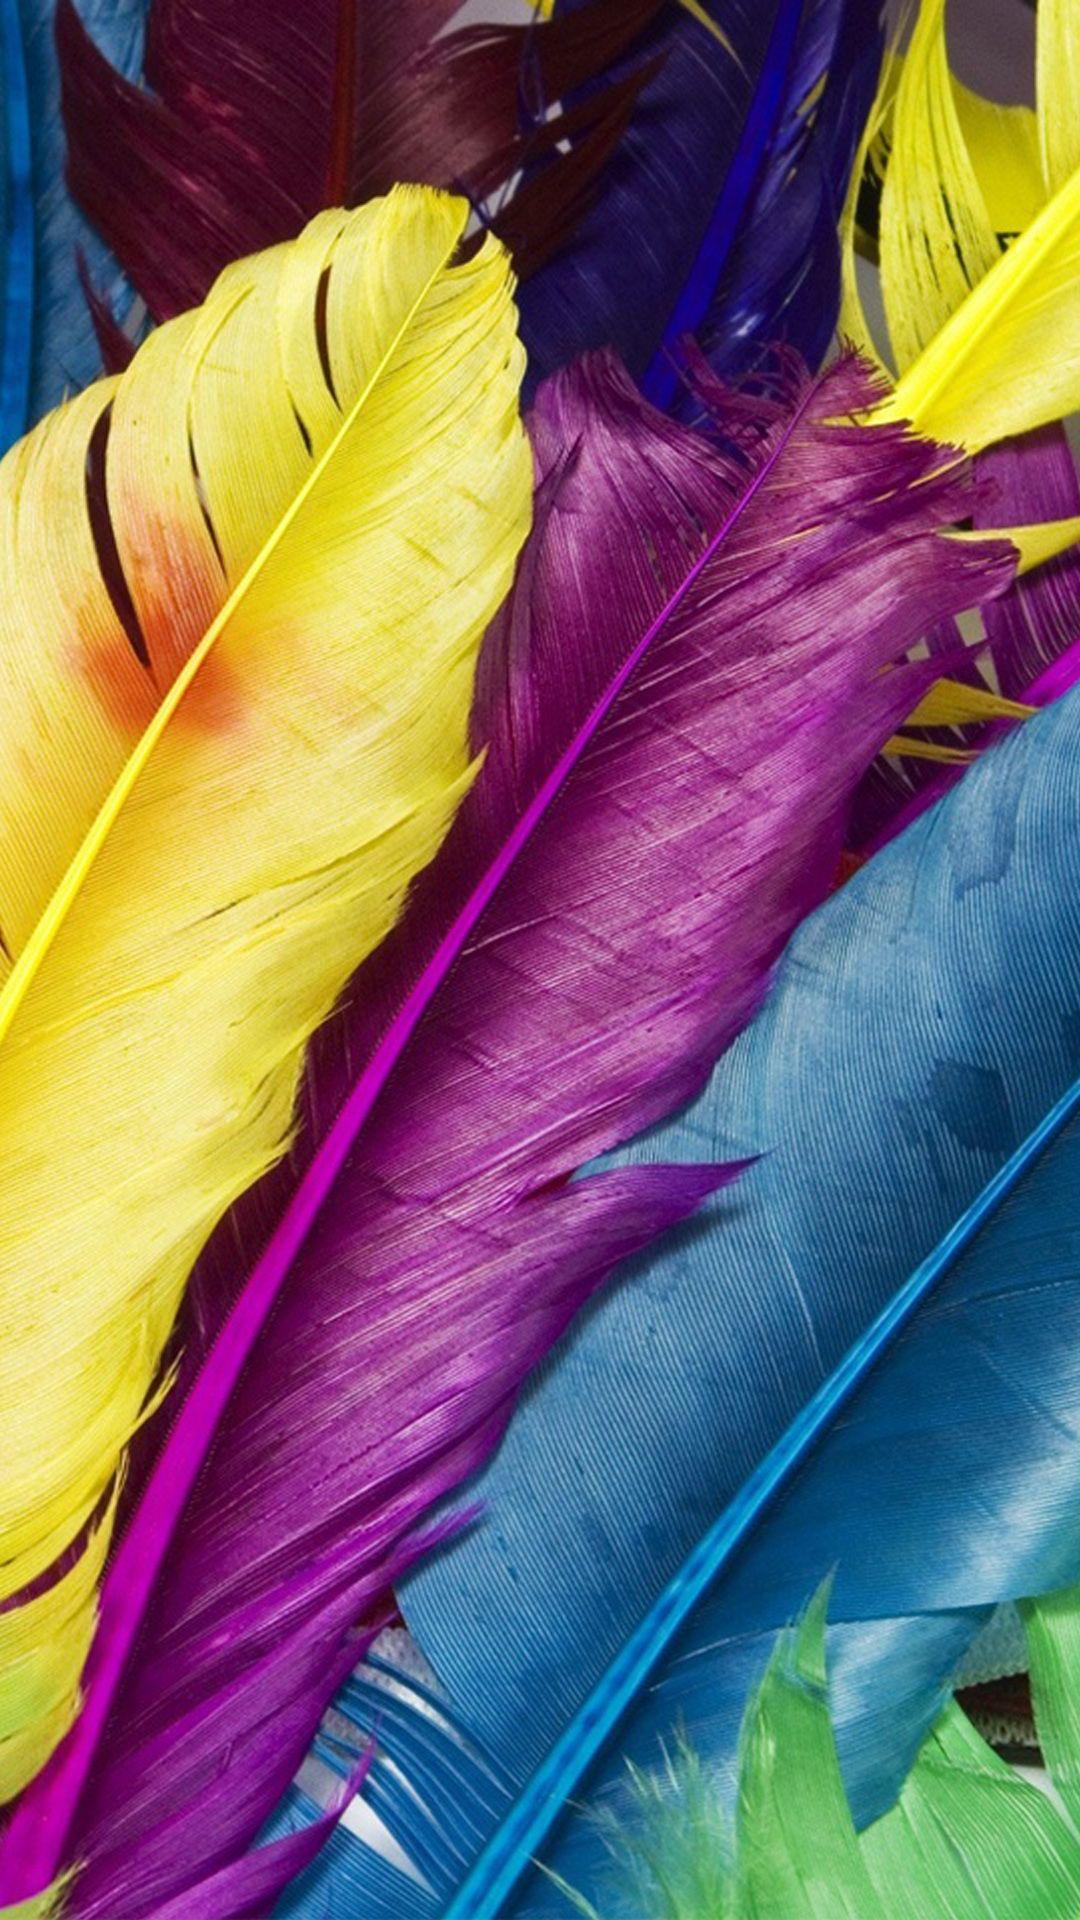 Feathers Samsung Galaxy S5 Wallpaper